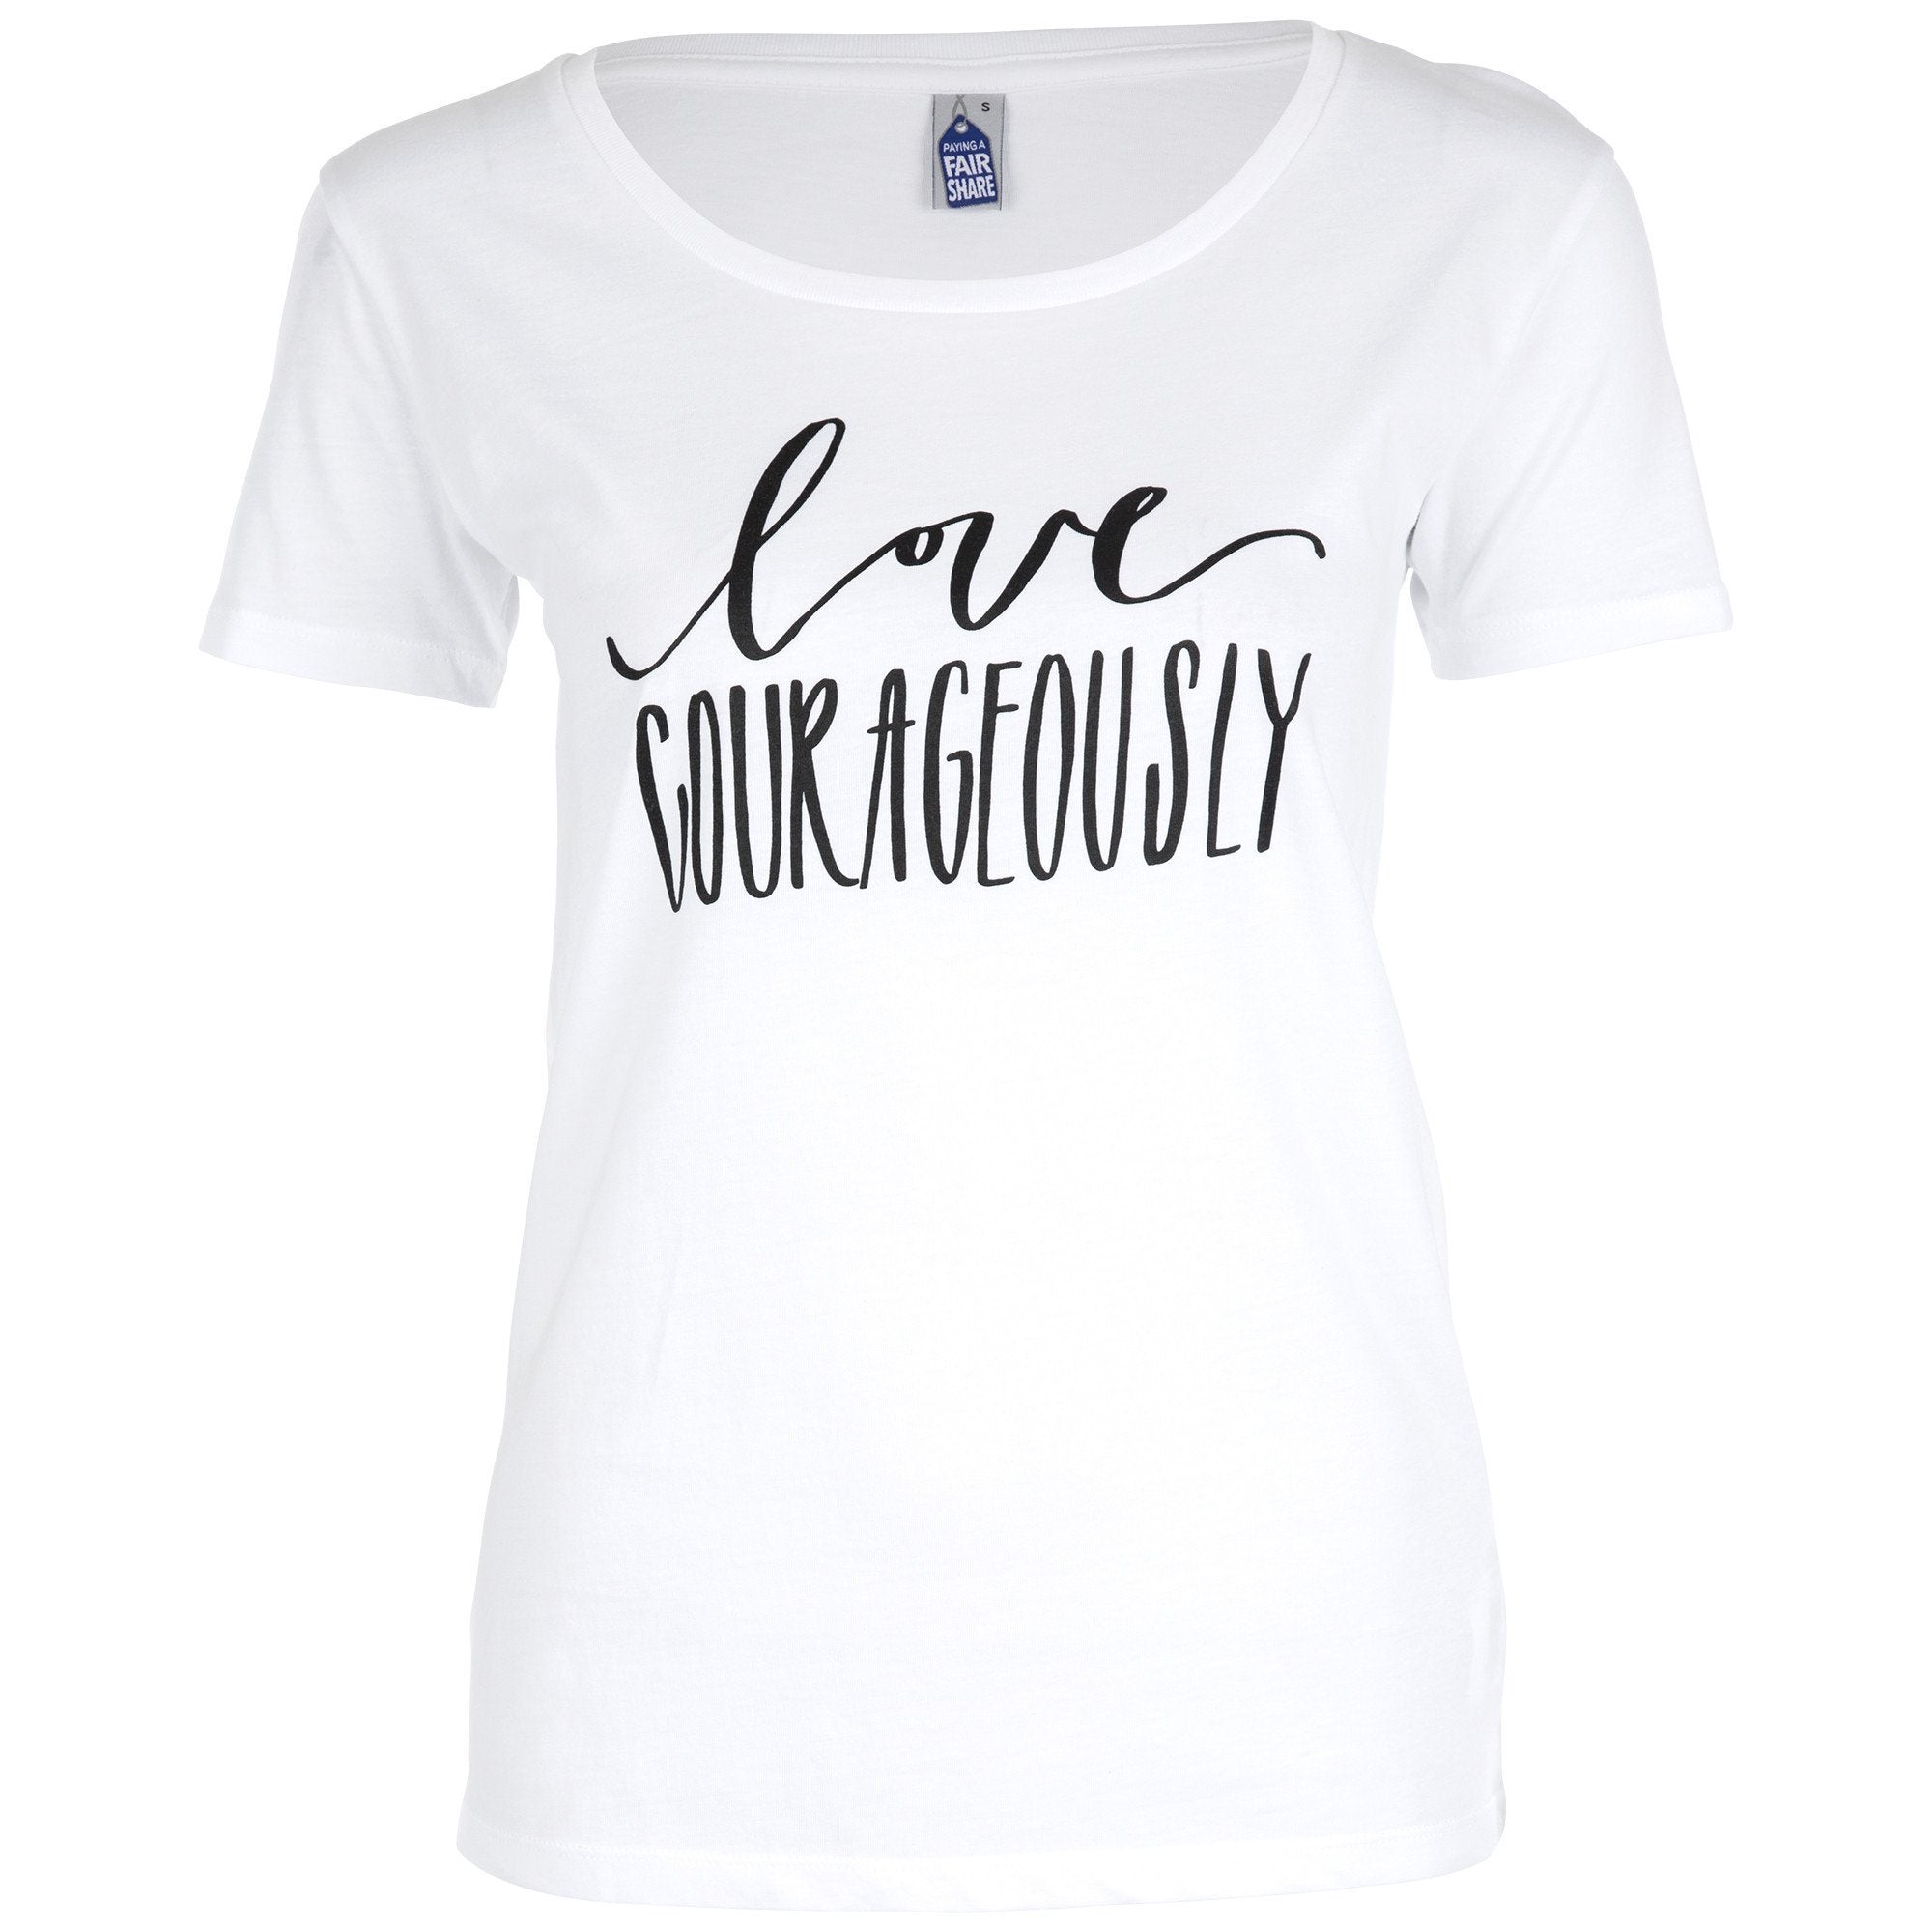 Love Courageously Tee - XL